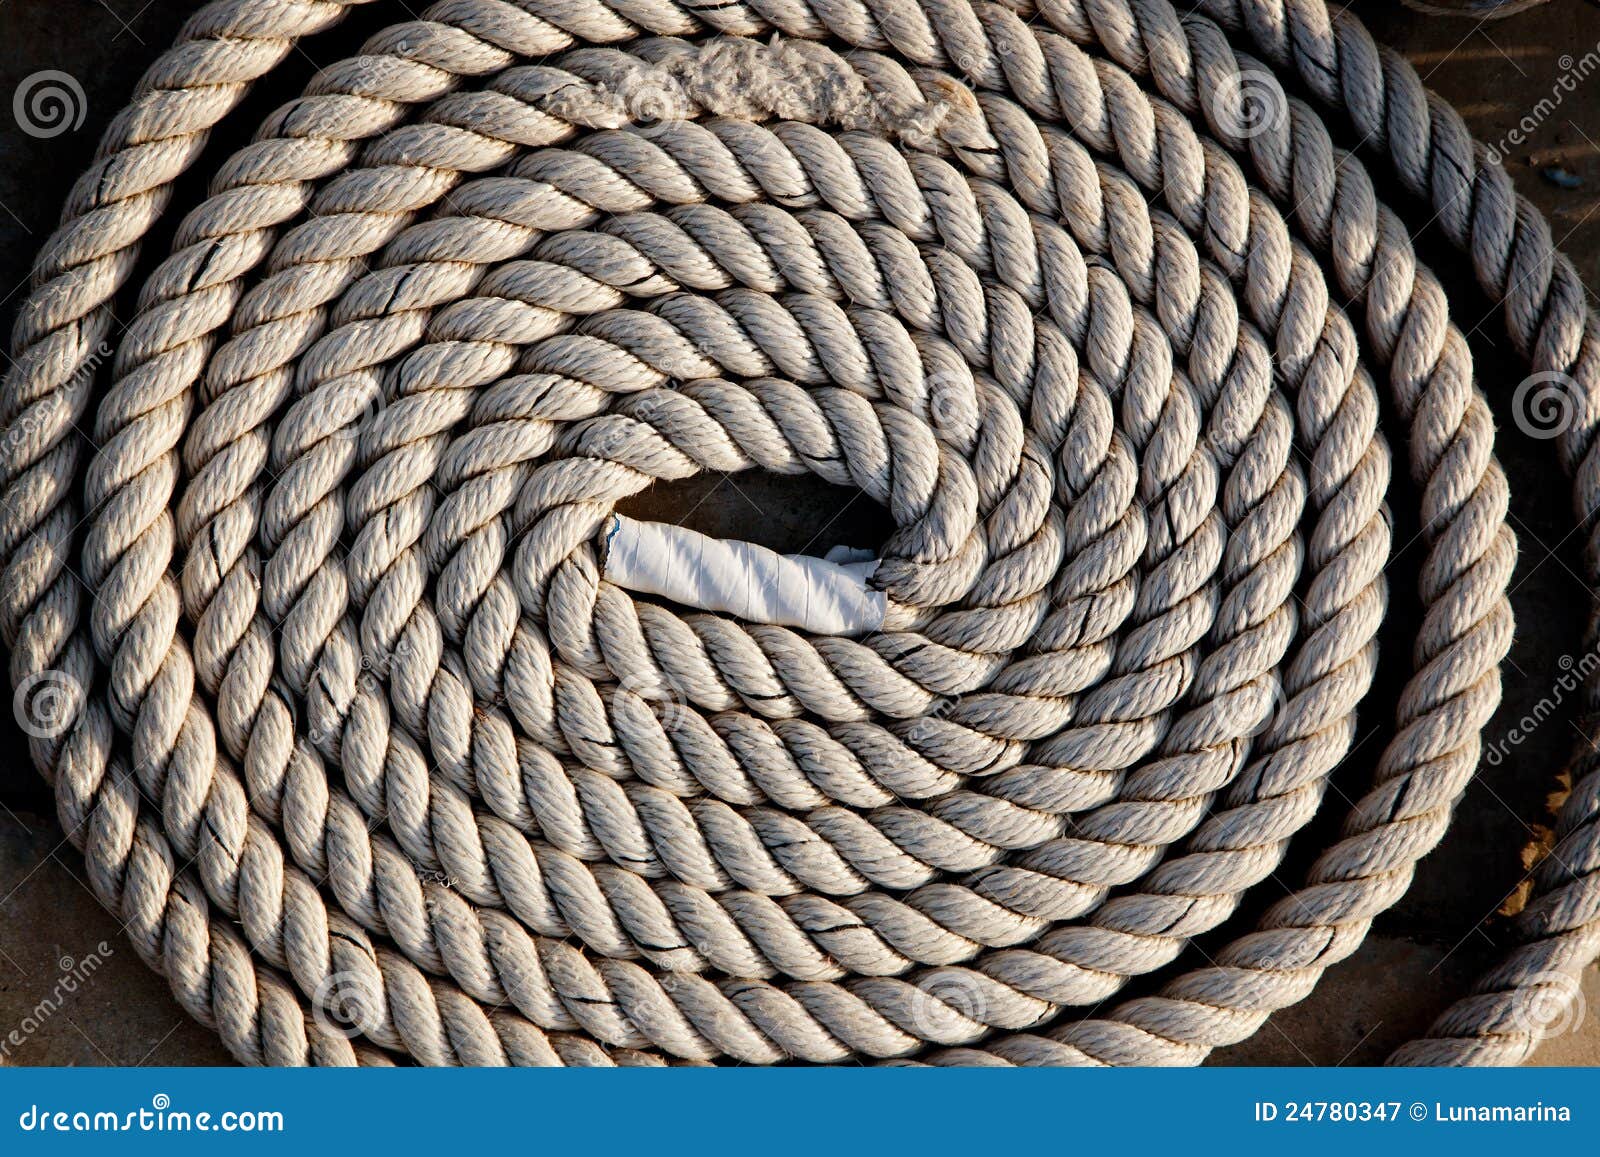 Coil of marine rope detail stock image. Image of anchor 